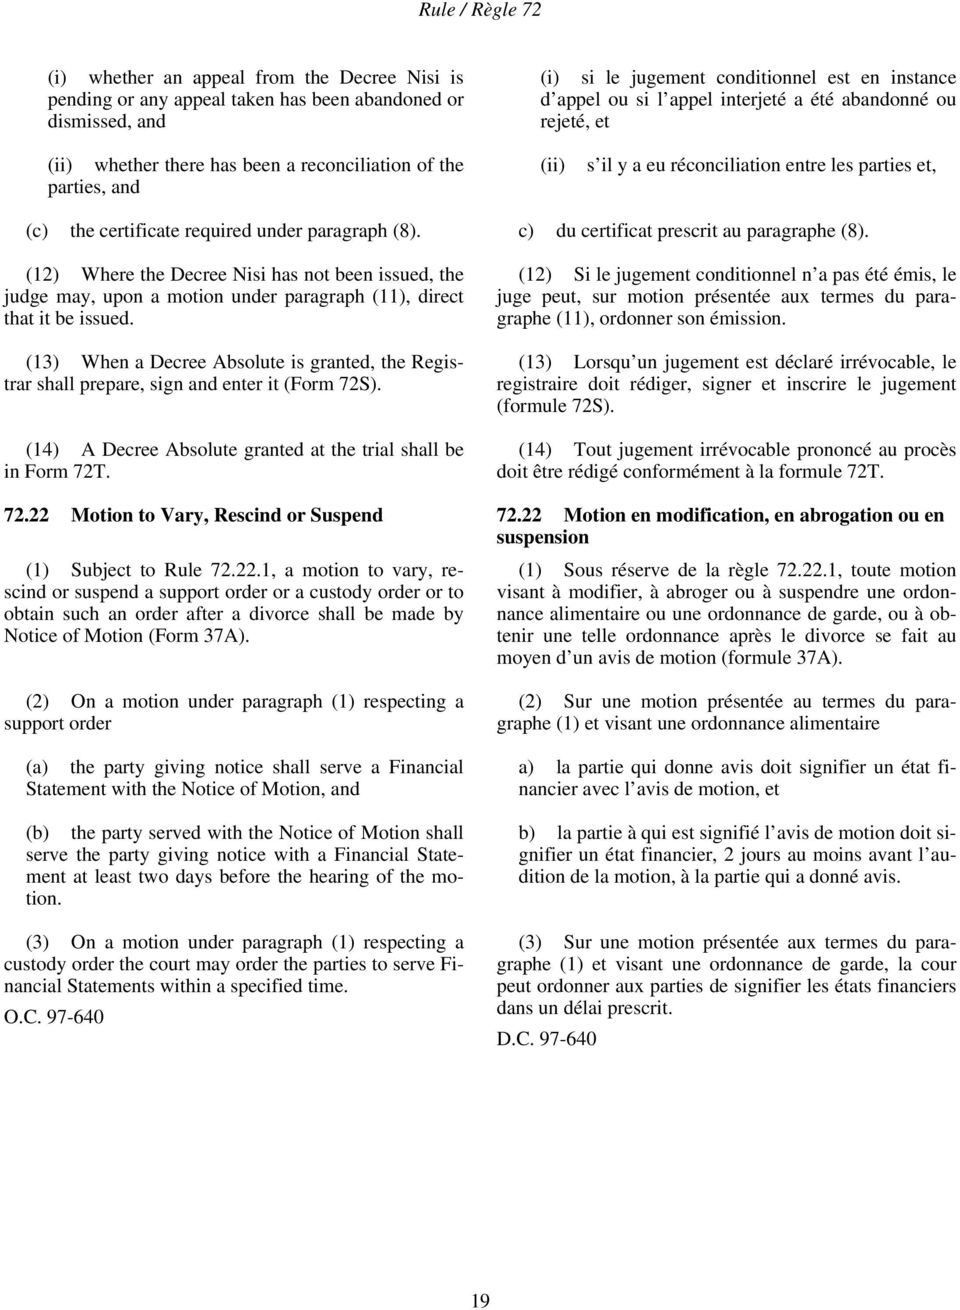 c) du certificat prescrit au paragraphe (8). (12) Where the Decree Nisi has not been issued, the judge may, upon a motion under paragraph (11), direct that it be issued.